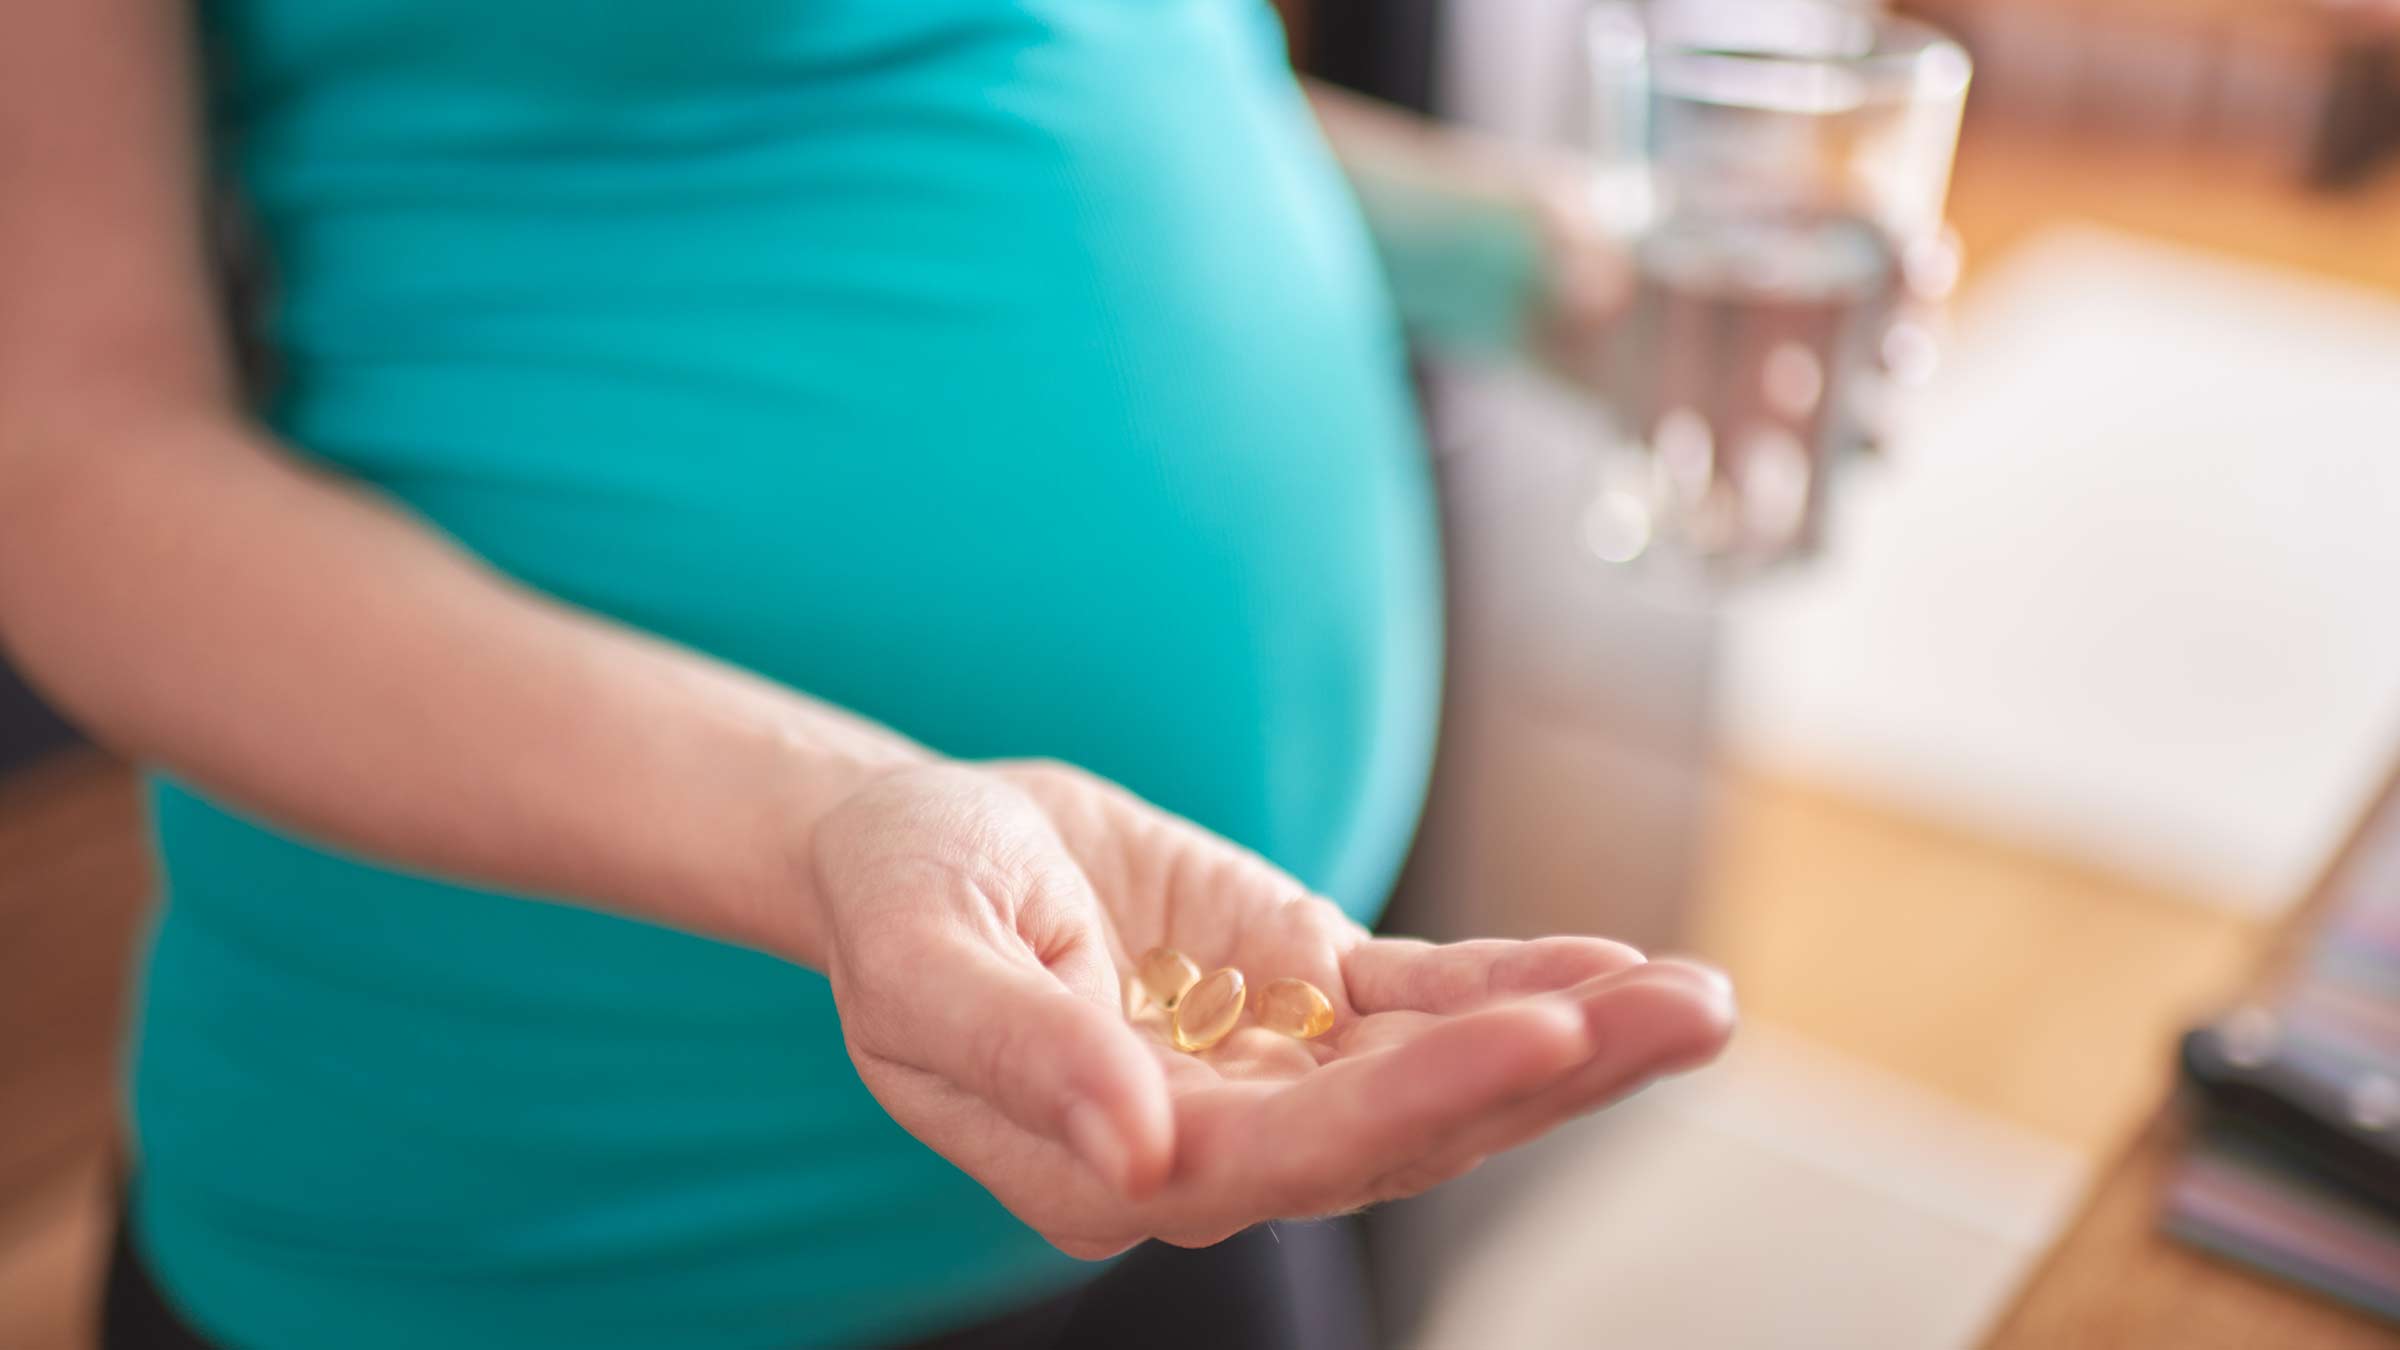 What to know about prenatal vitamins